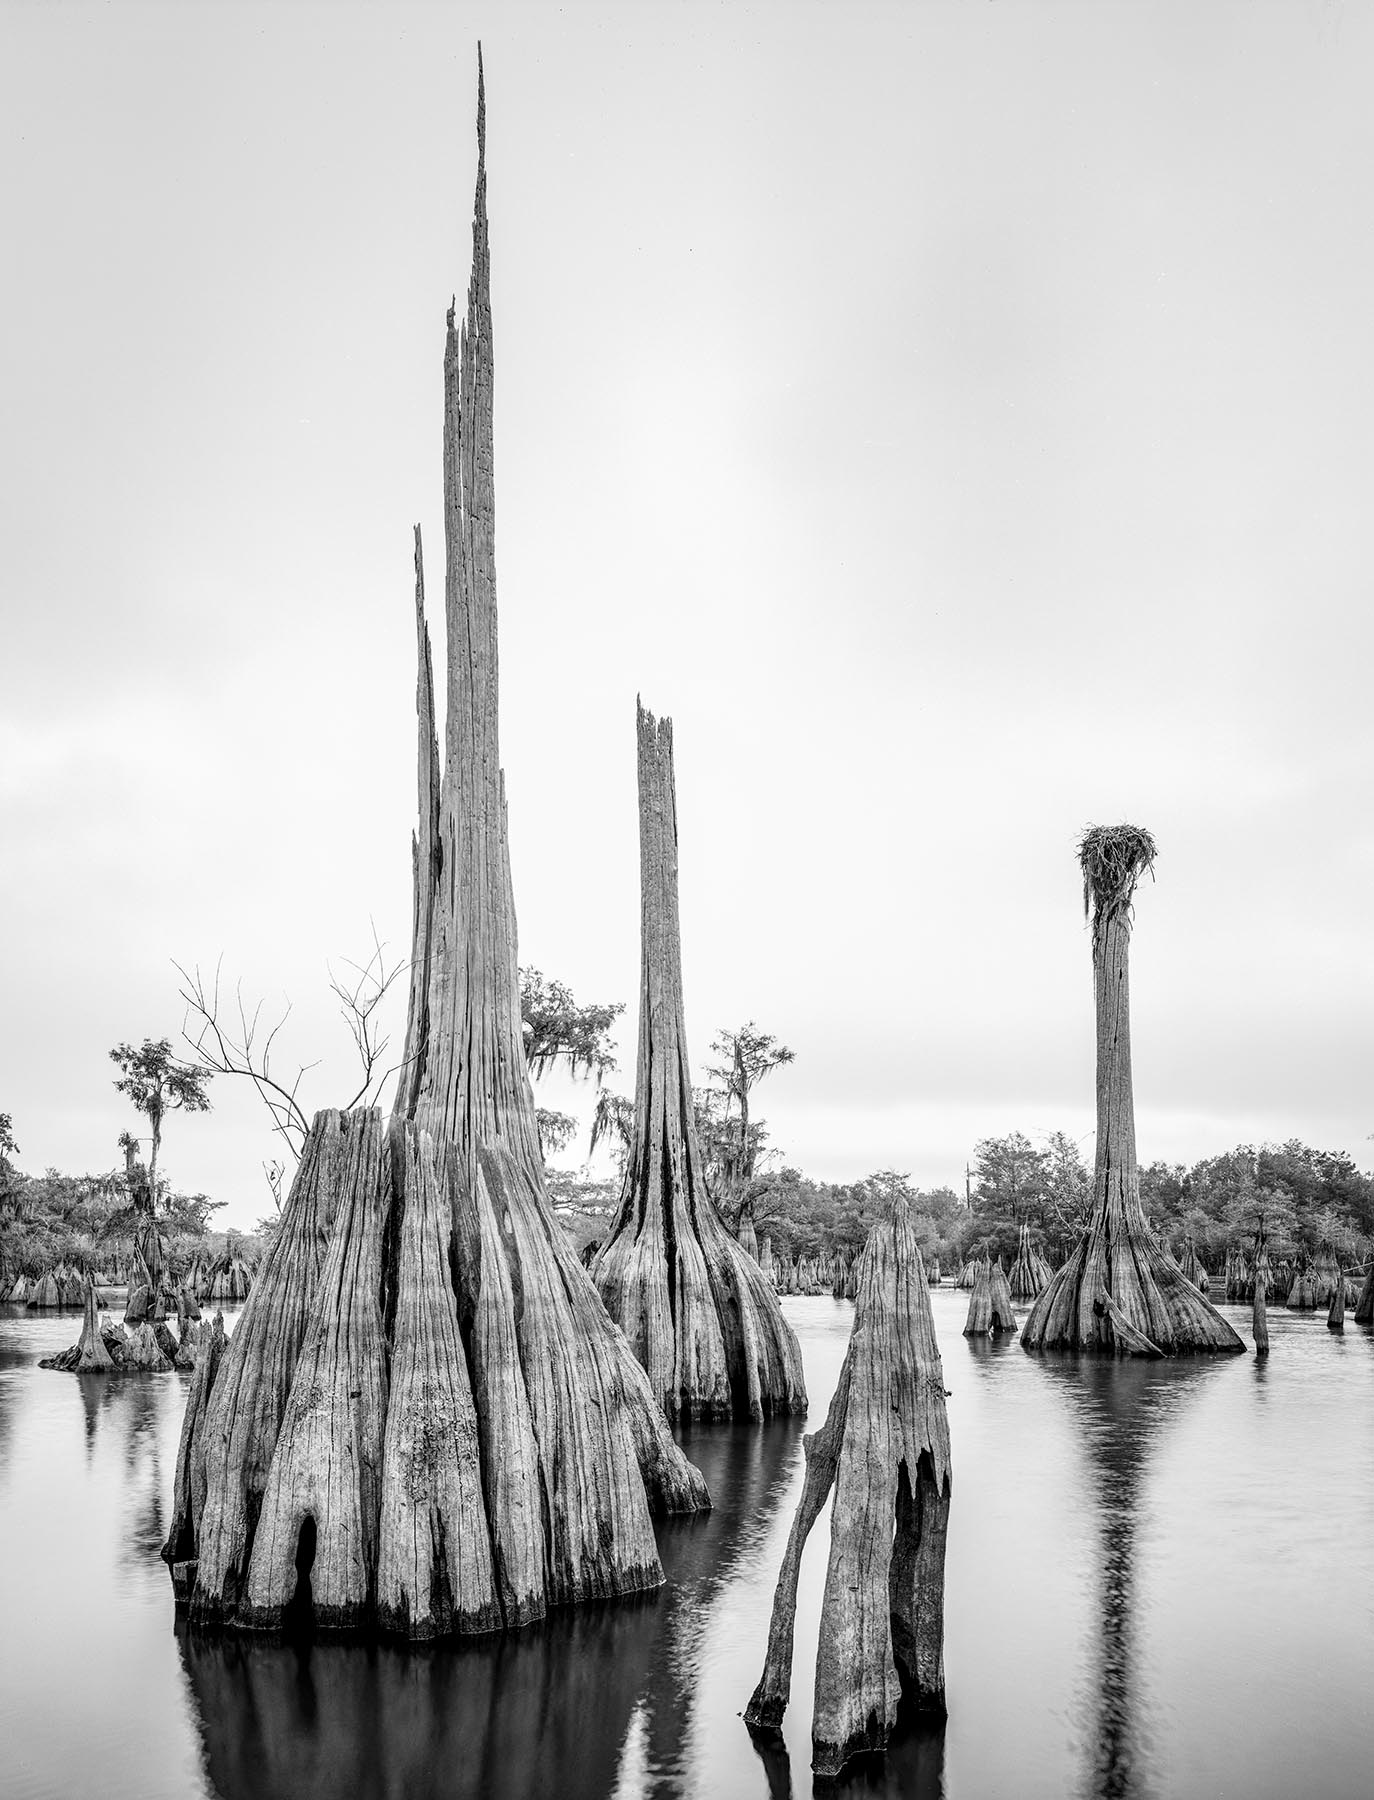 I refer to this lake as a Cypress tree museum. Most of our large Cypress were cut dow about 100 years ago. These trees being...